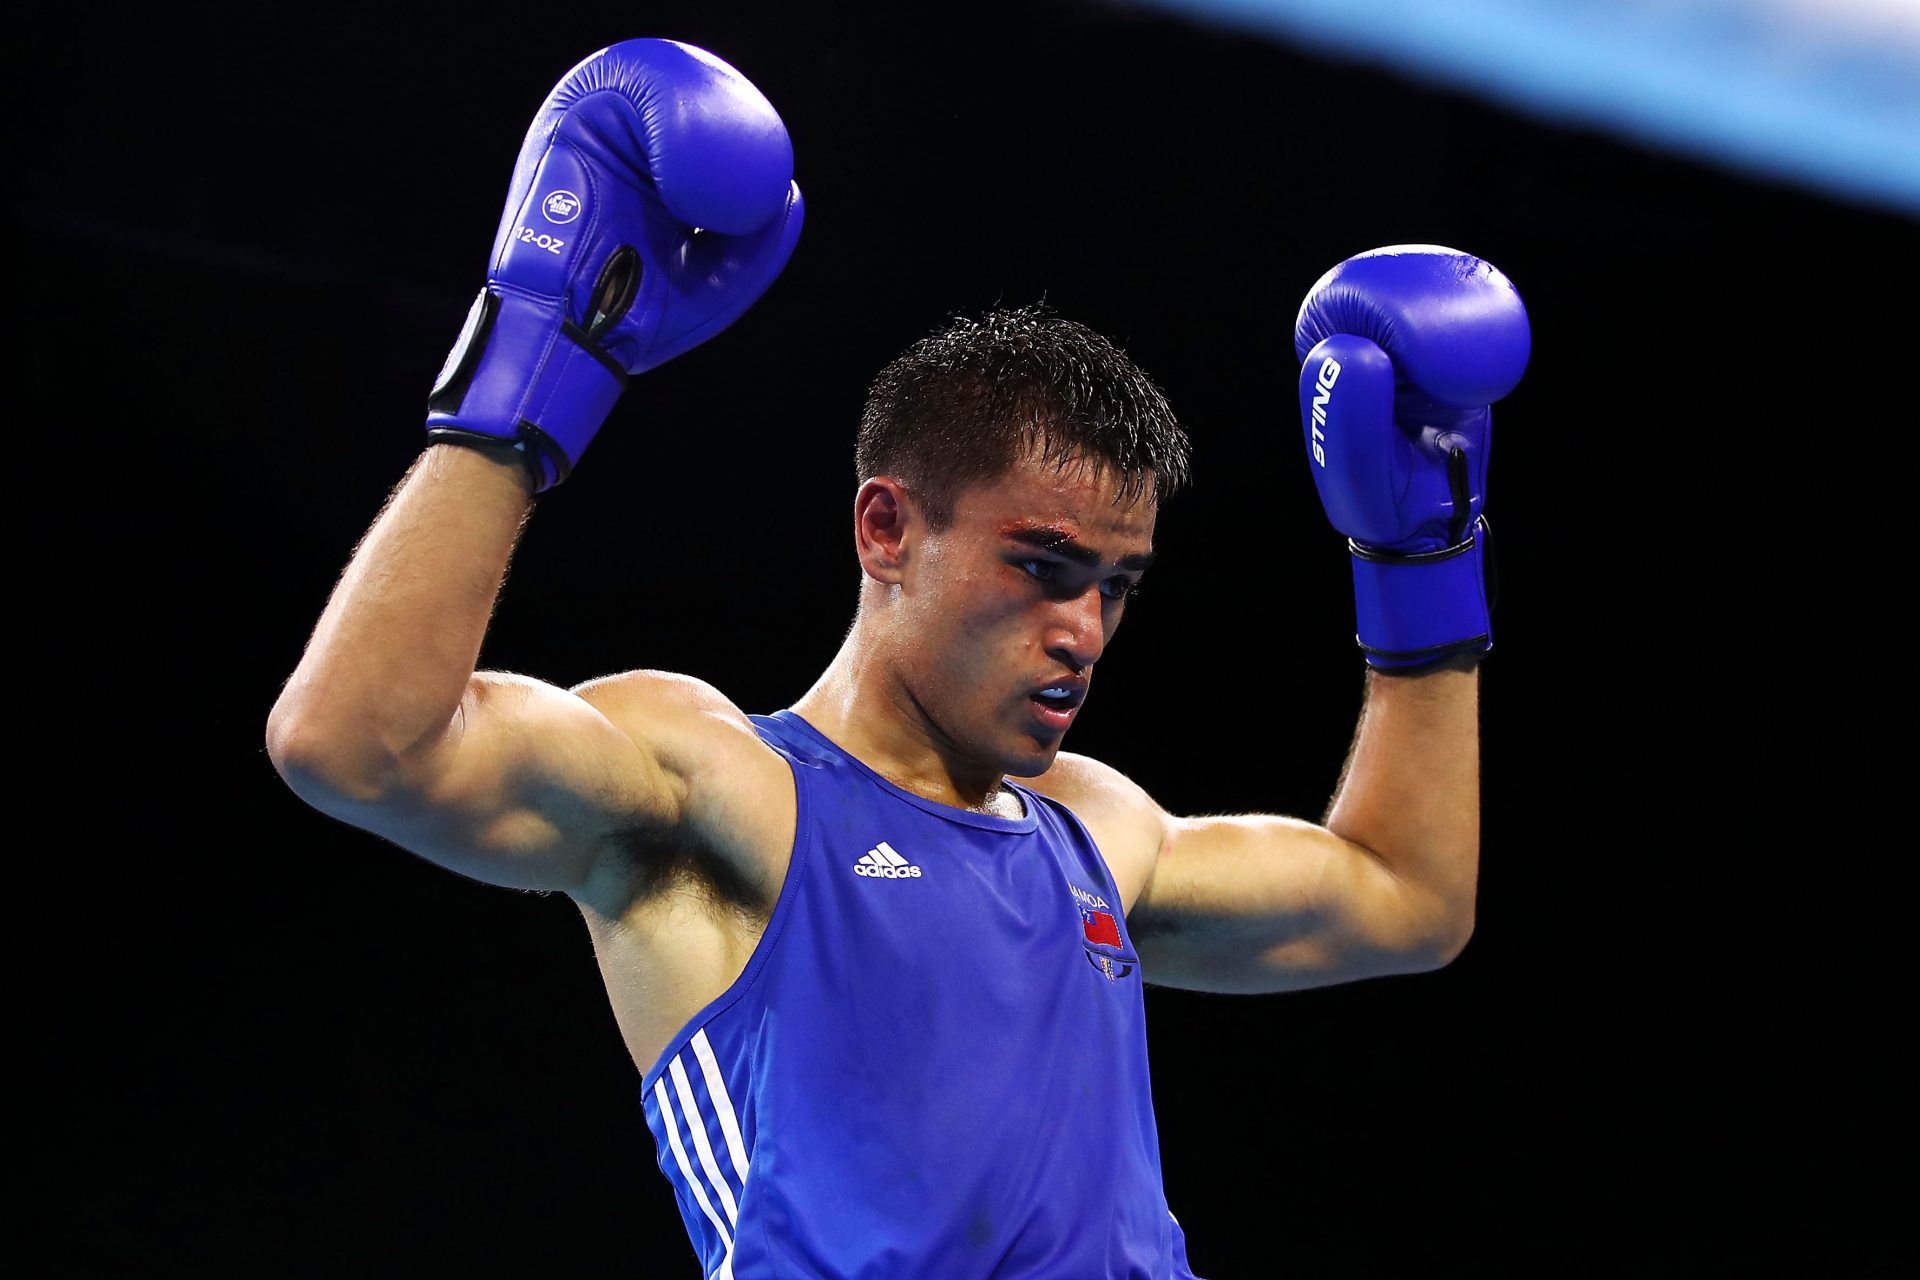 Olympic heartbreak: The Samoan boxer who lost his coach two days before his event